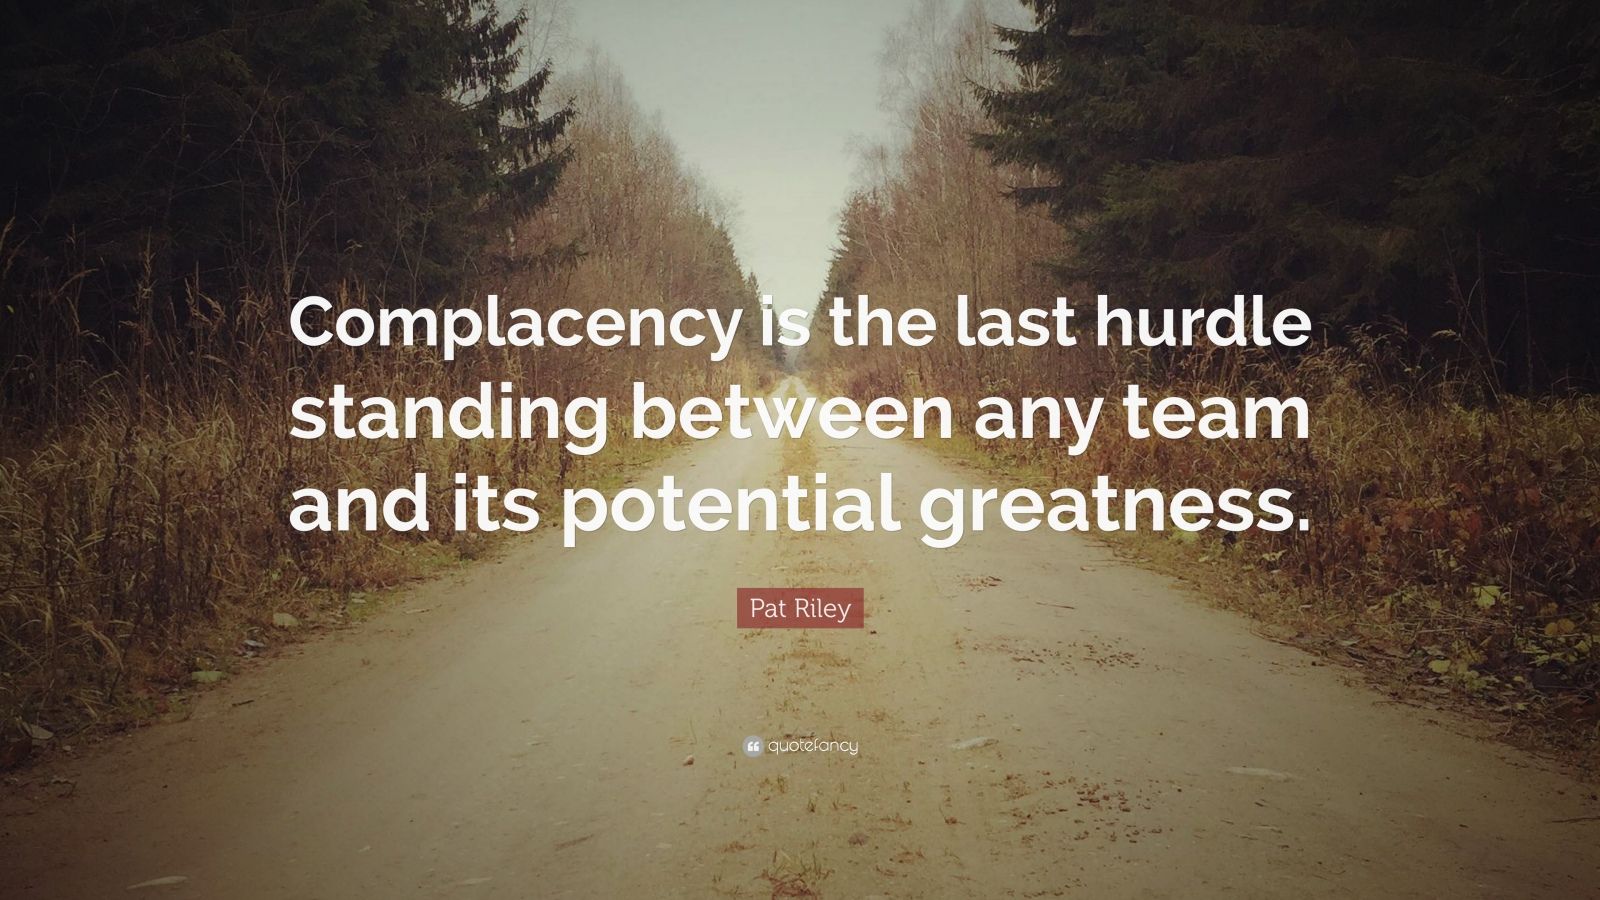 Pat Riley Quote: “Complacency is the last hurdle standing between any